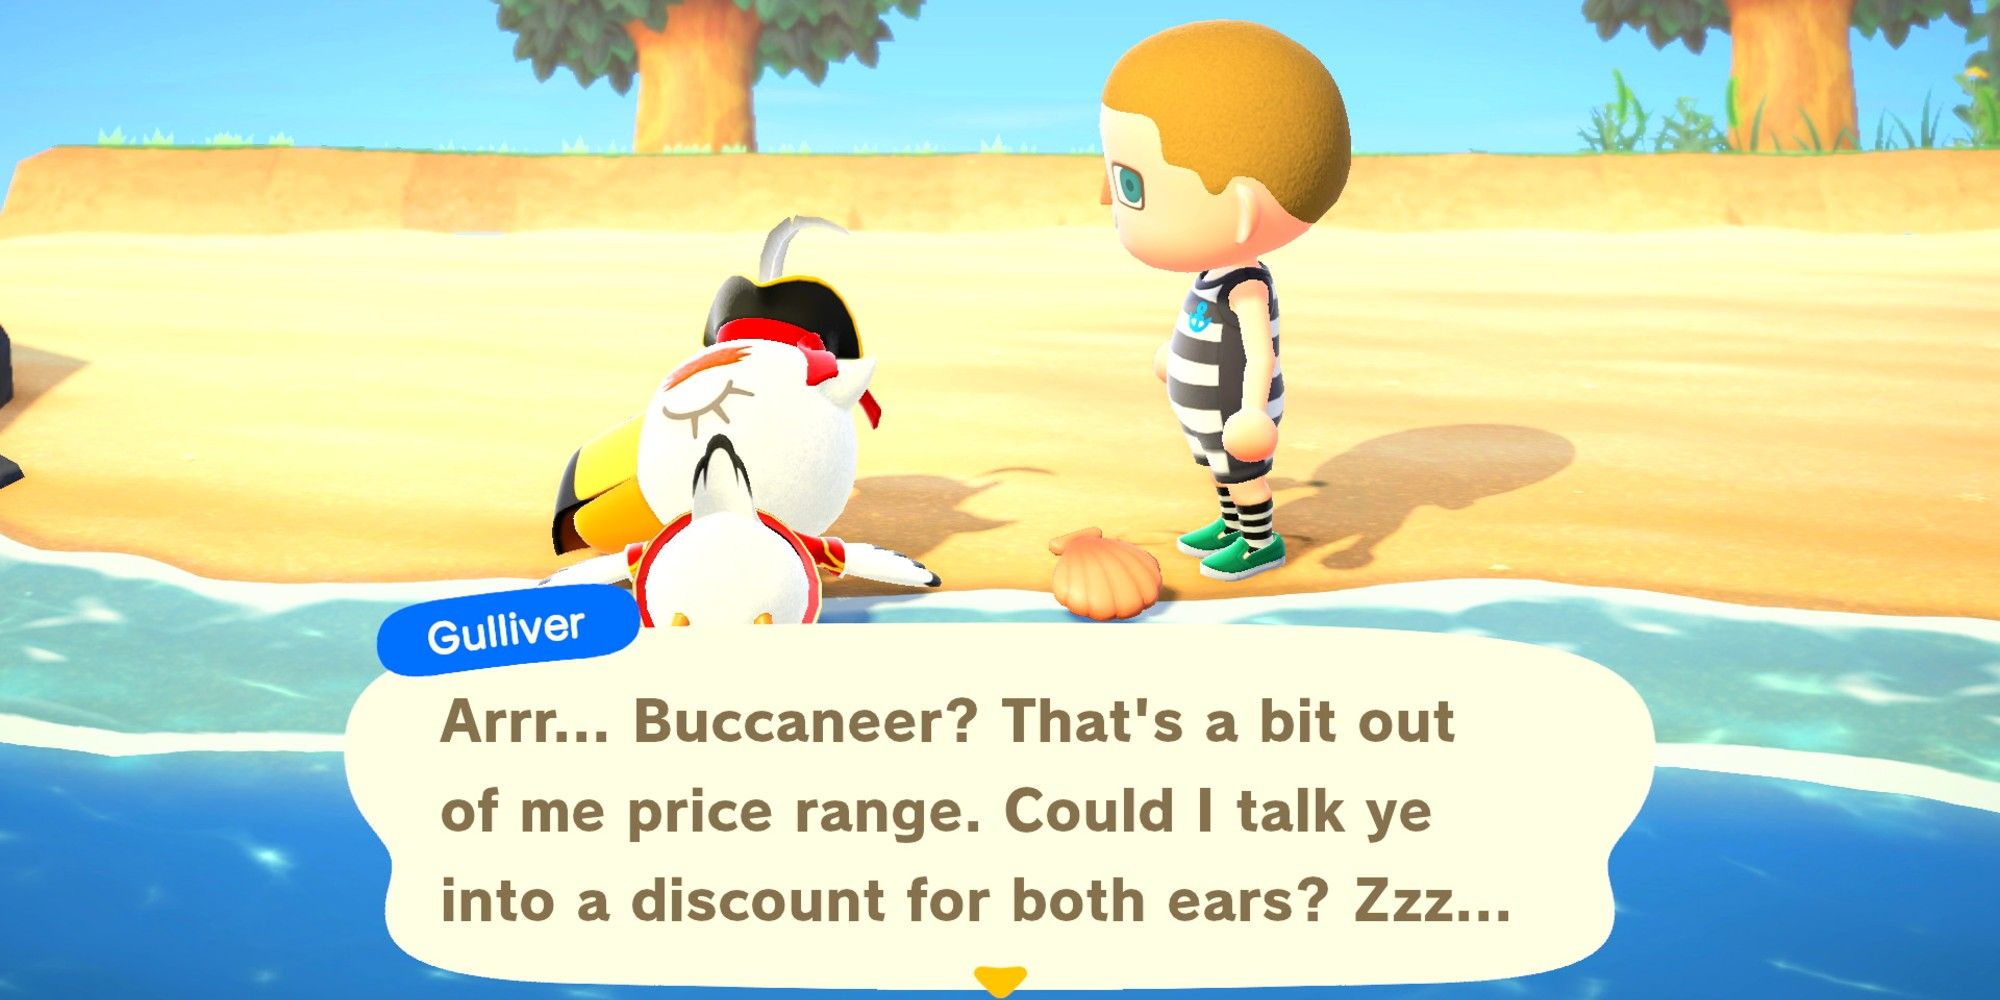 A player finds Pirate Gulliver, Gullivarrr, washed up on a beach on their island in Animal Crossing: New Horizons